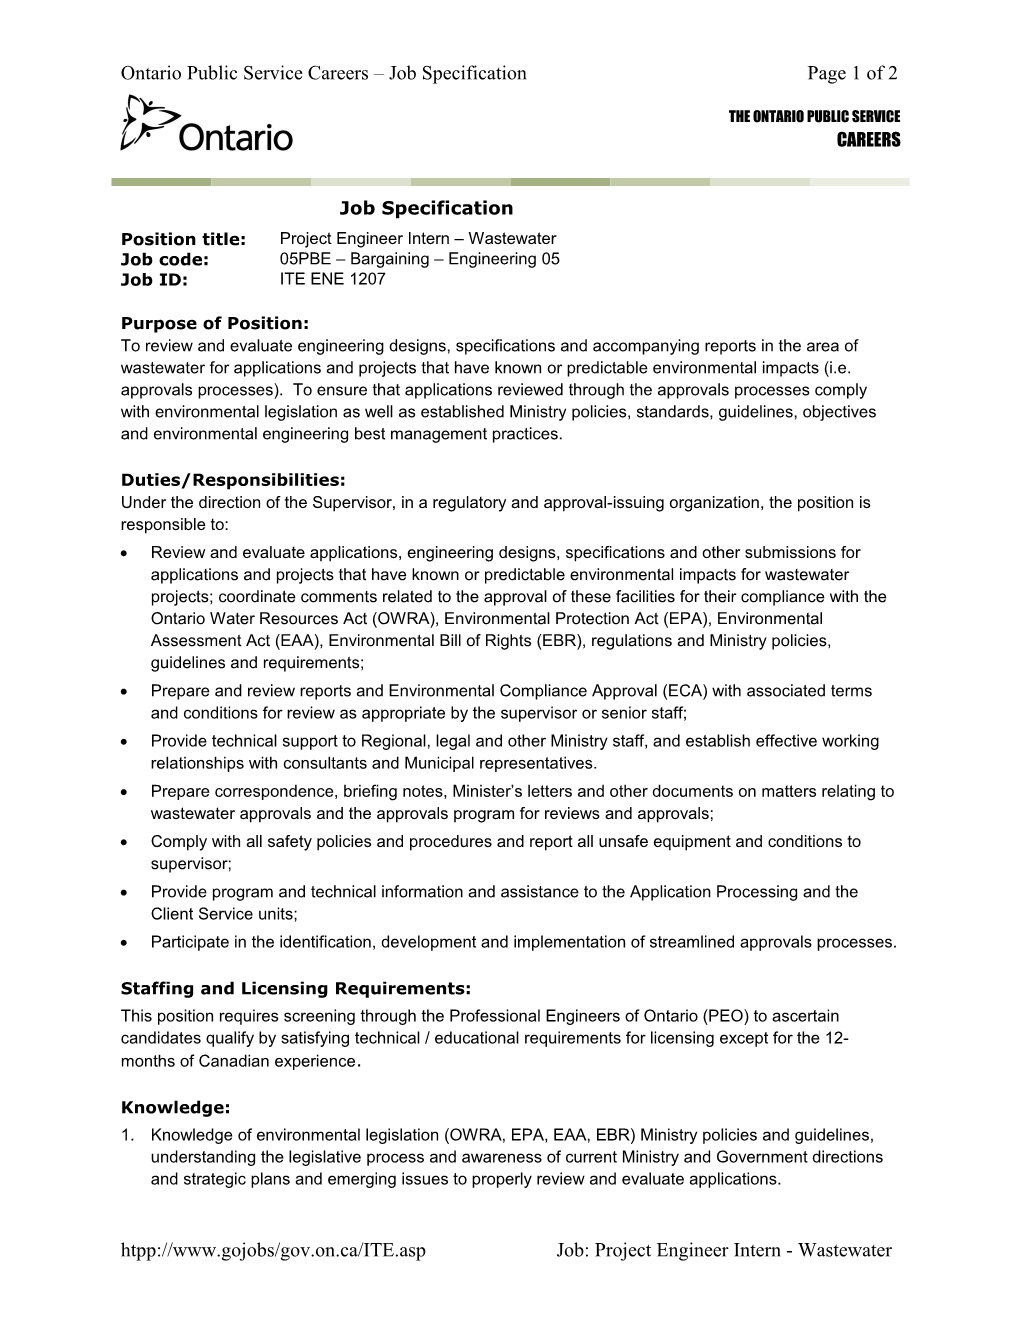 Ontario Public Service Careers Job Specification Page 1 of 1